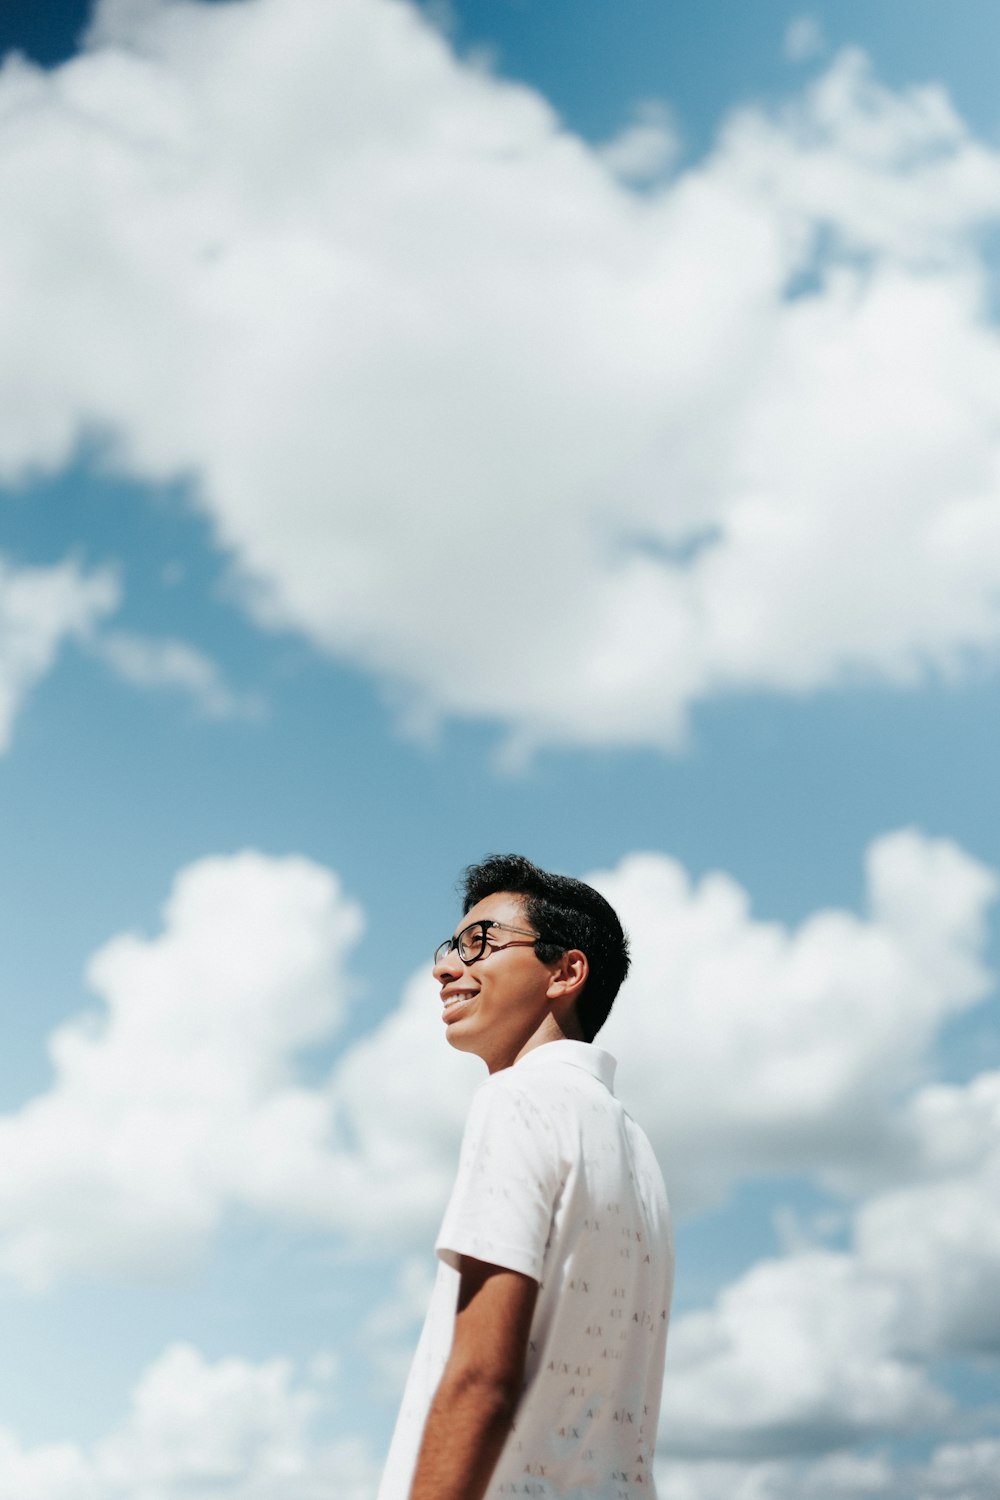 a man in a white shirt and glasses standing under a cloudy blue sky